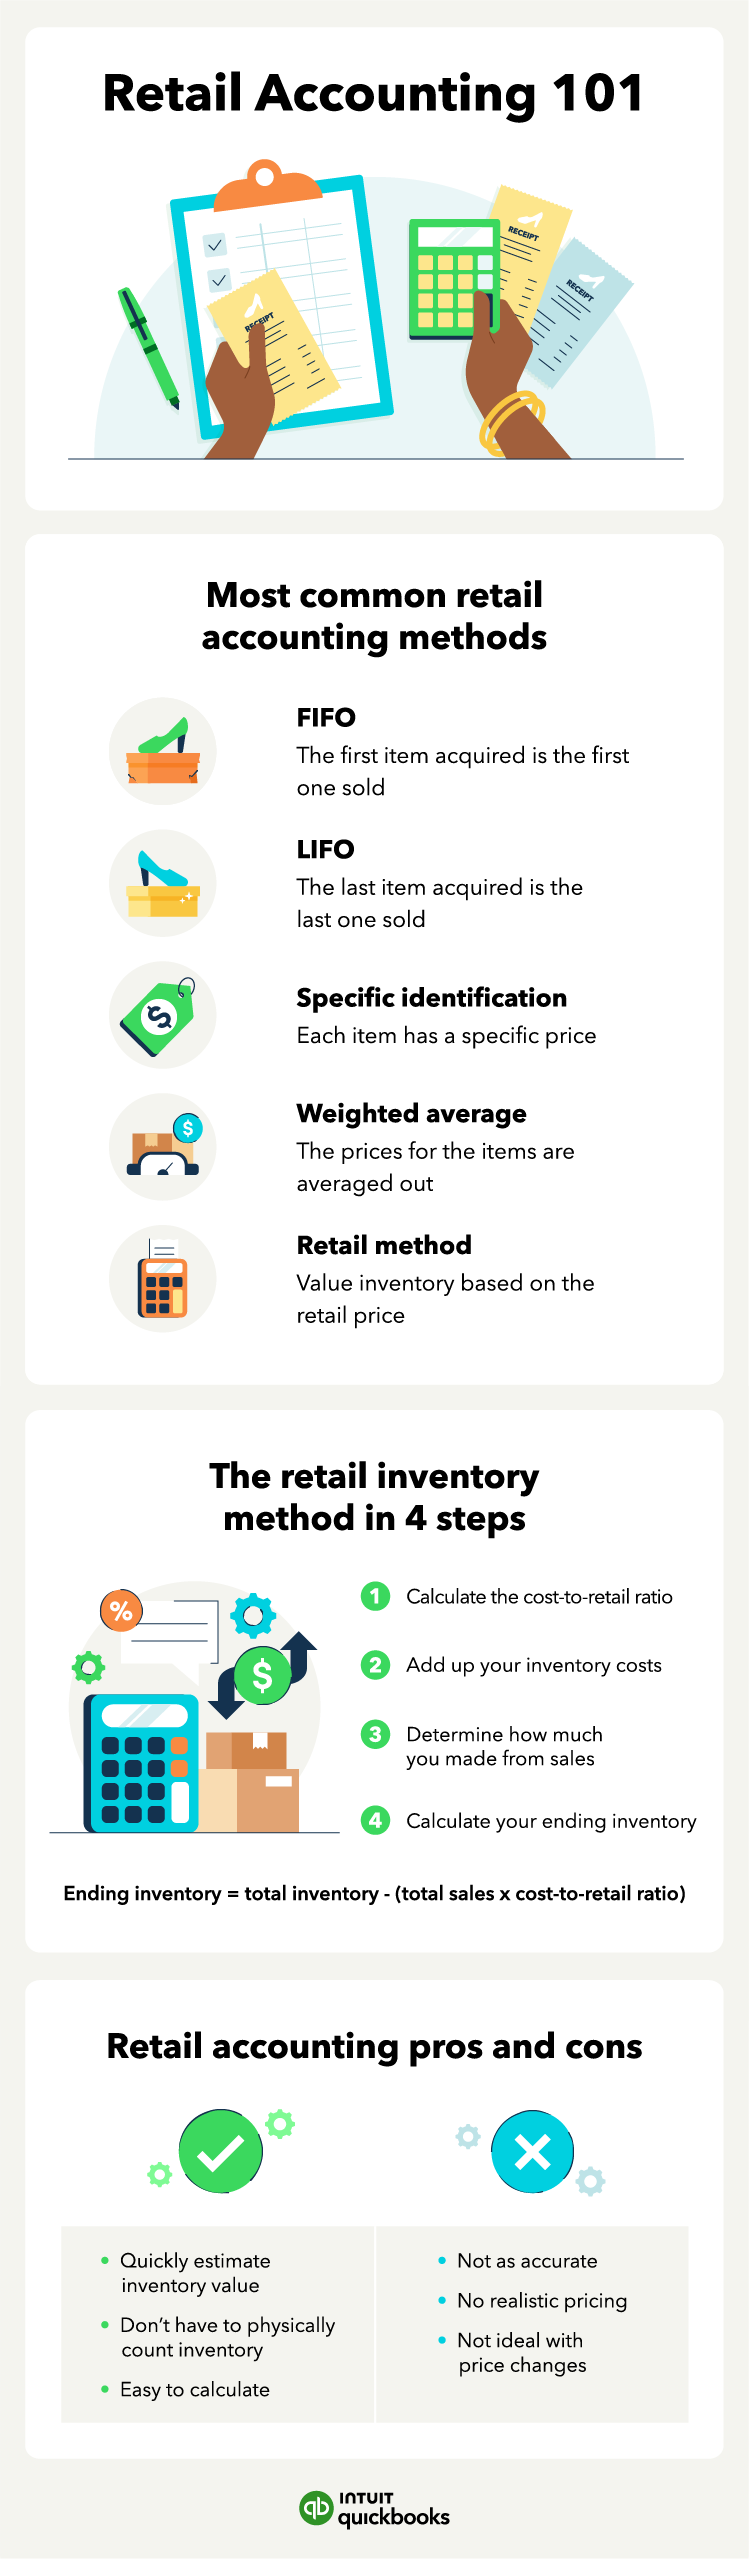 An infographic overviewing retail accounting, including the methods, how to do it, and its pros and cons.